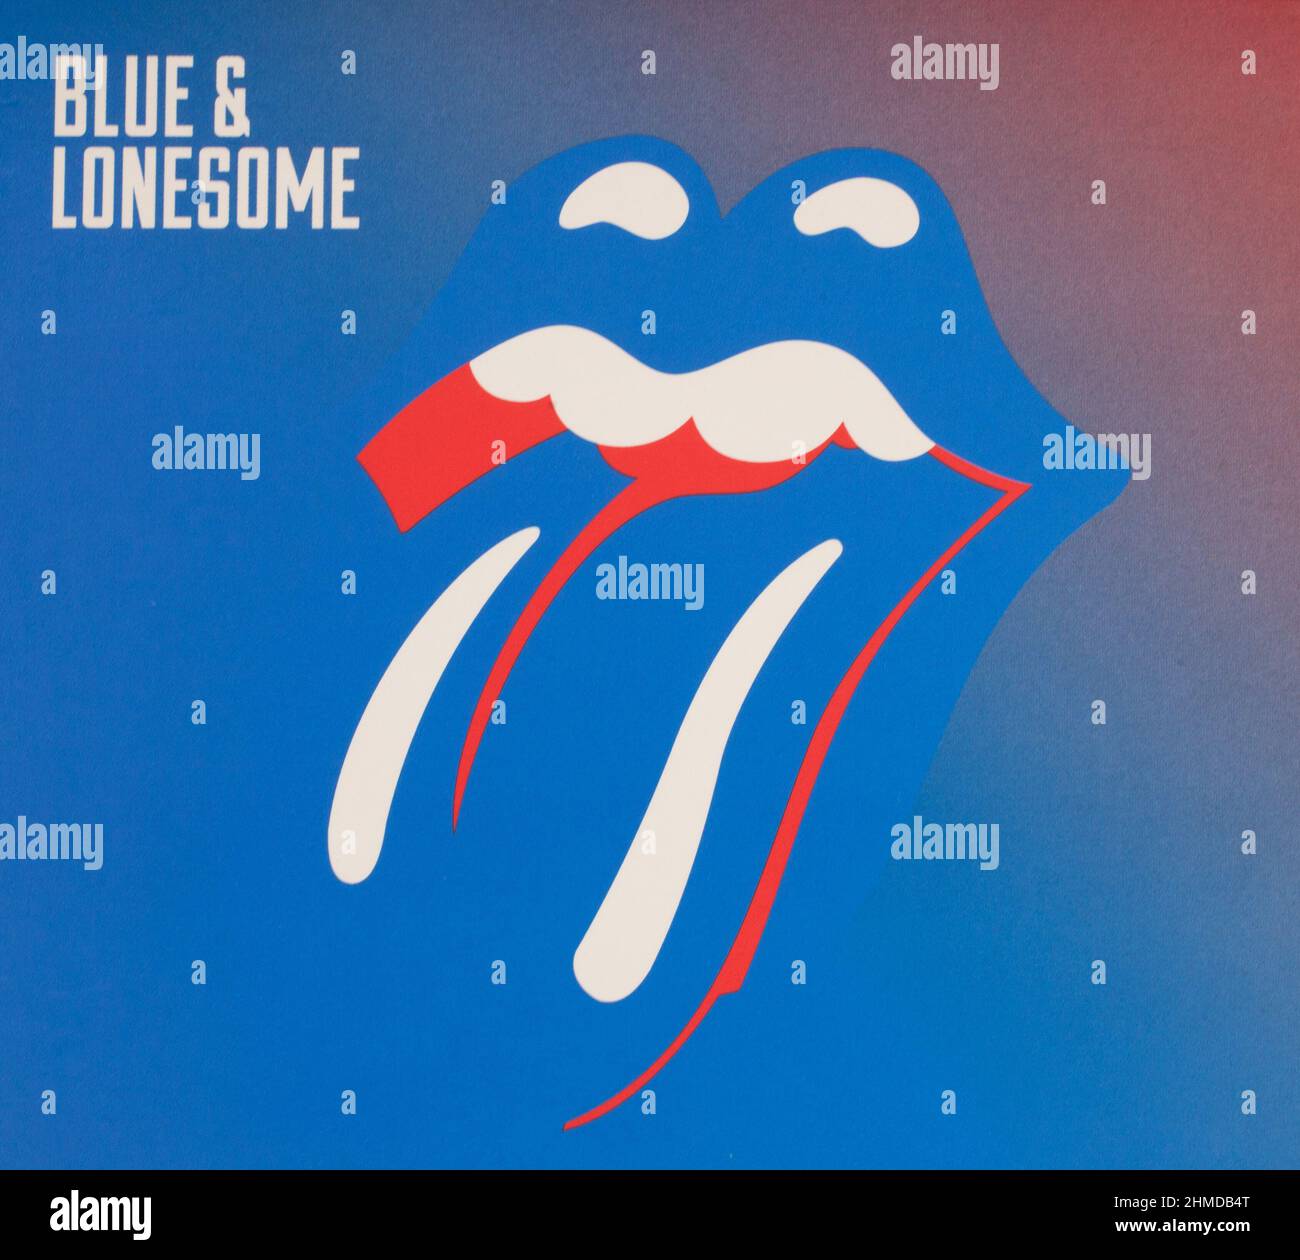 The cd album cover, Blues and Lonesome by The Rolling Stones Stock Photo